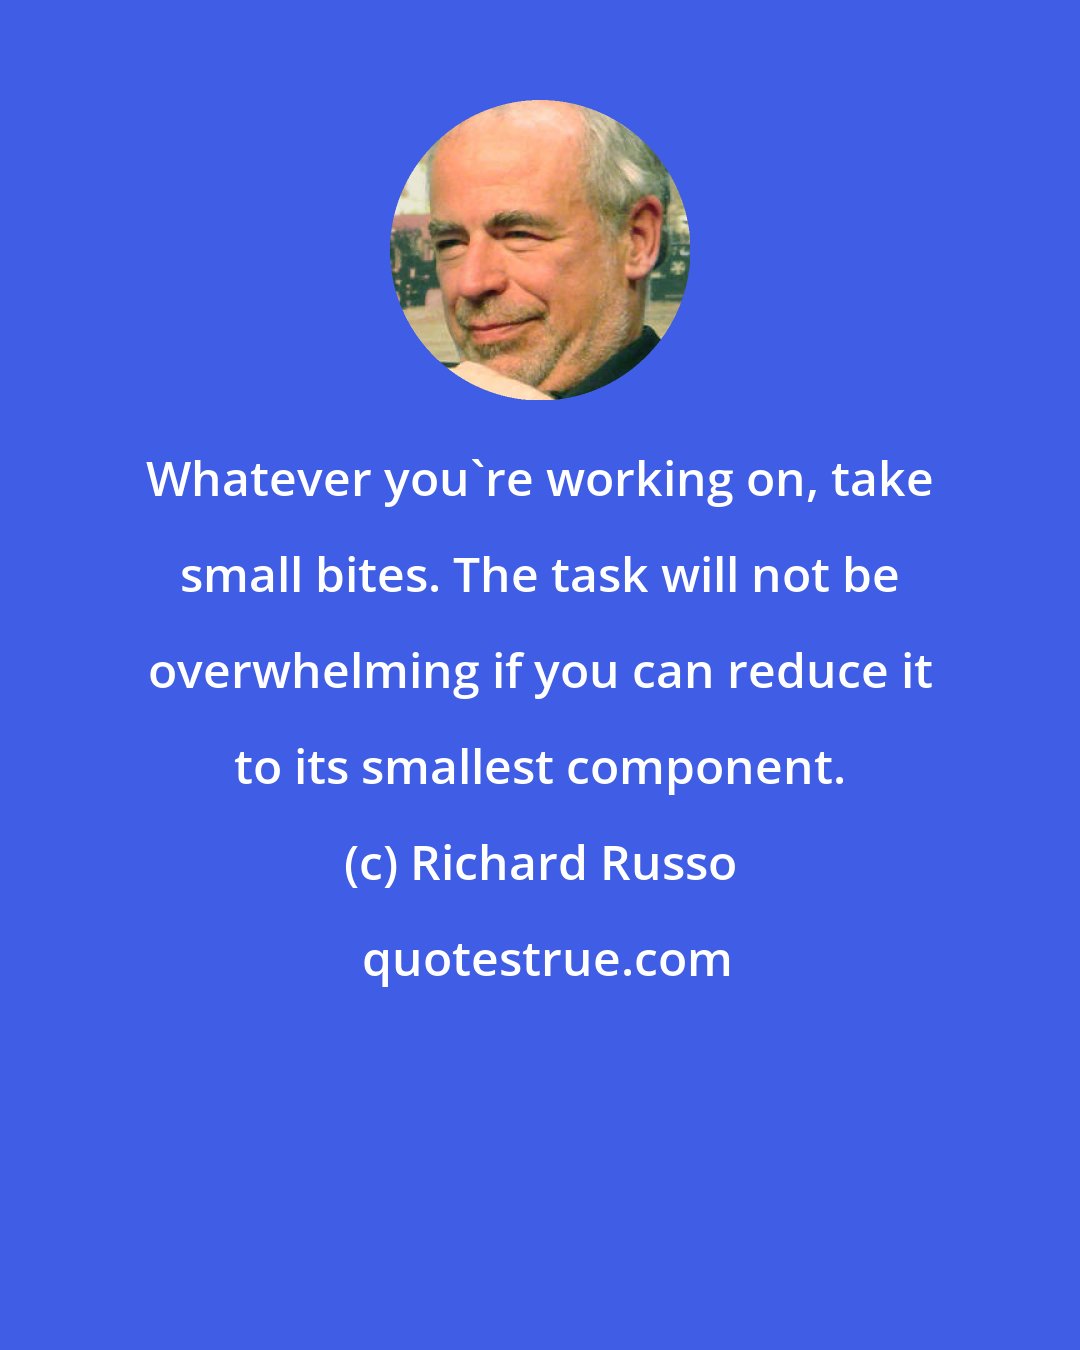 Richard Russo: Whatever you're working on, take small bites. The task will not be overwhelming if you can reduce it to its smallest component.